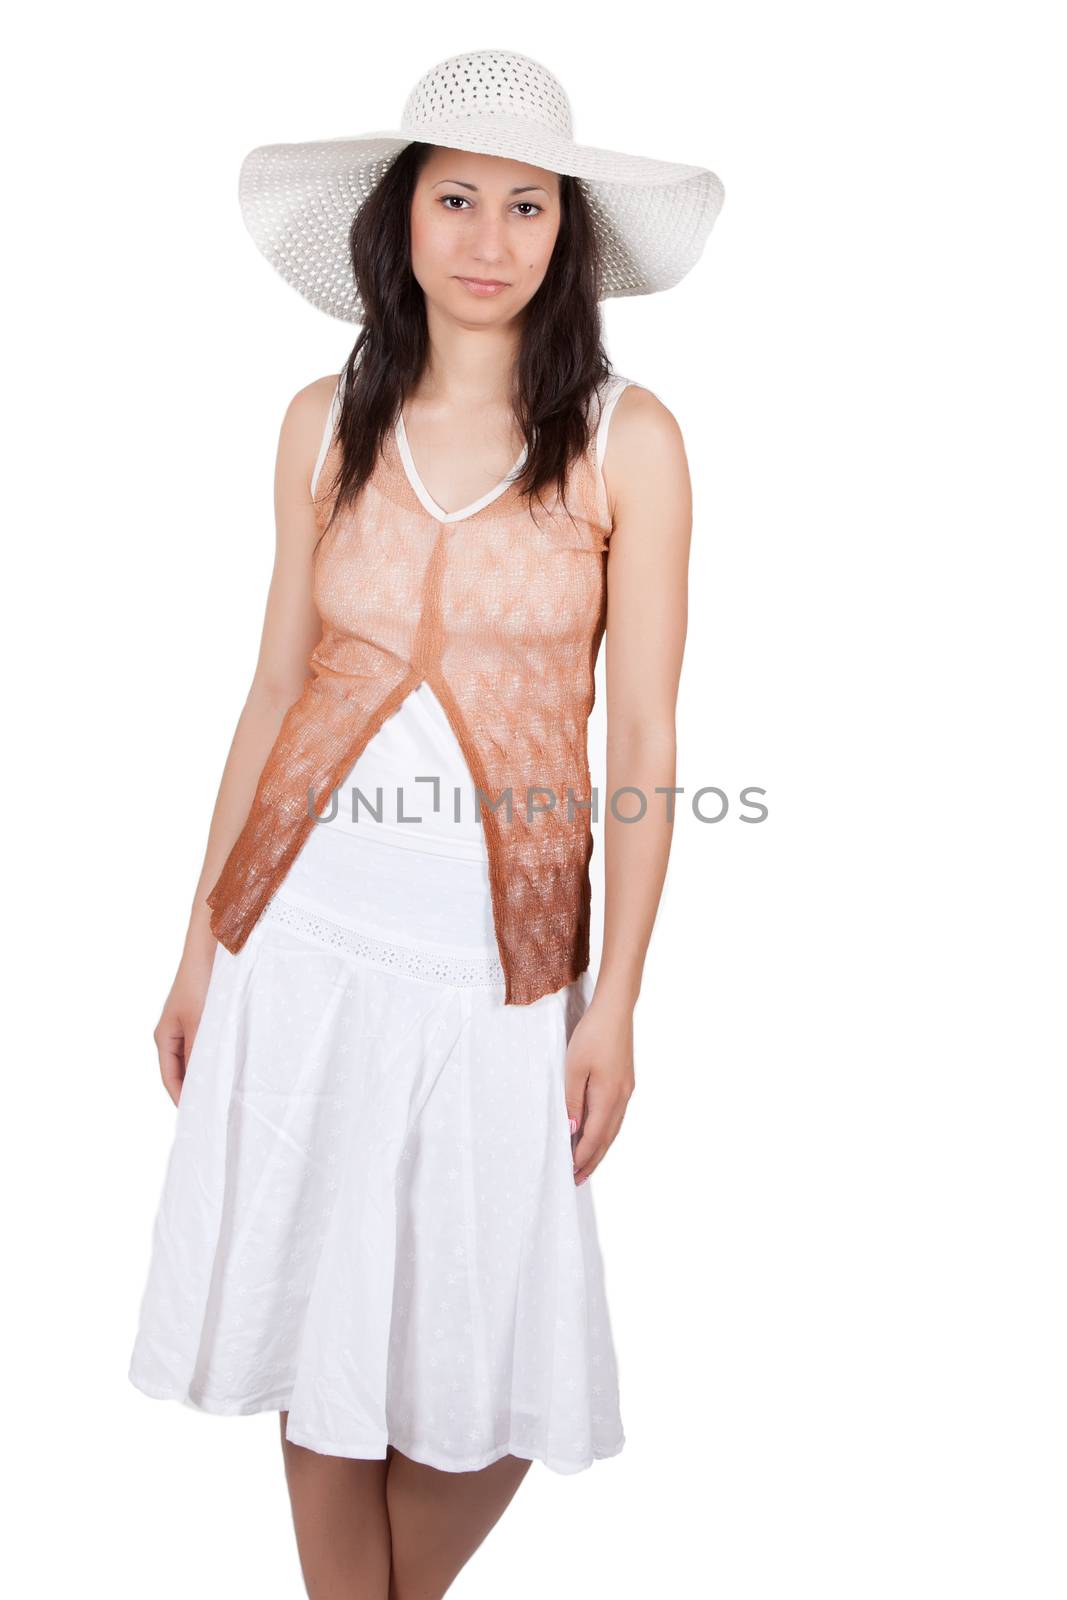 Brunette woman in white sun hat in a white dress, on white background, posing like a model